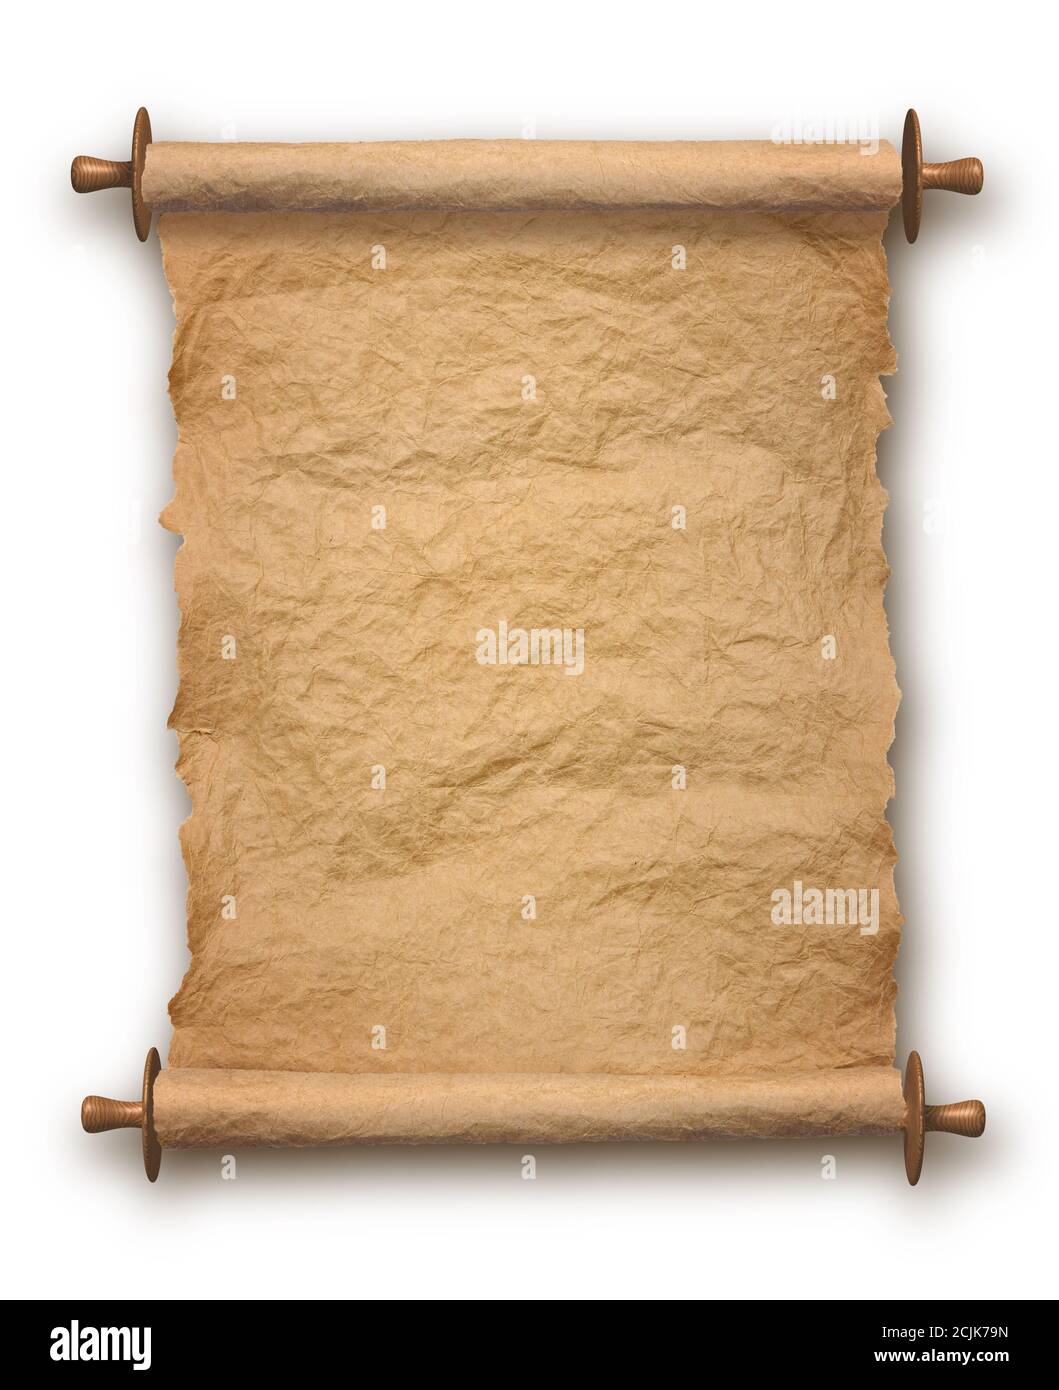 https://c8.alamy.com/comp/2CJK79N/old-rolled-blank-parchment-paper-roll-vertical-on-white-background-with-drop-shadow-2CJK79N.jpg